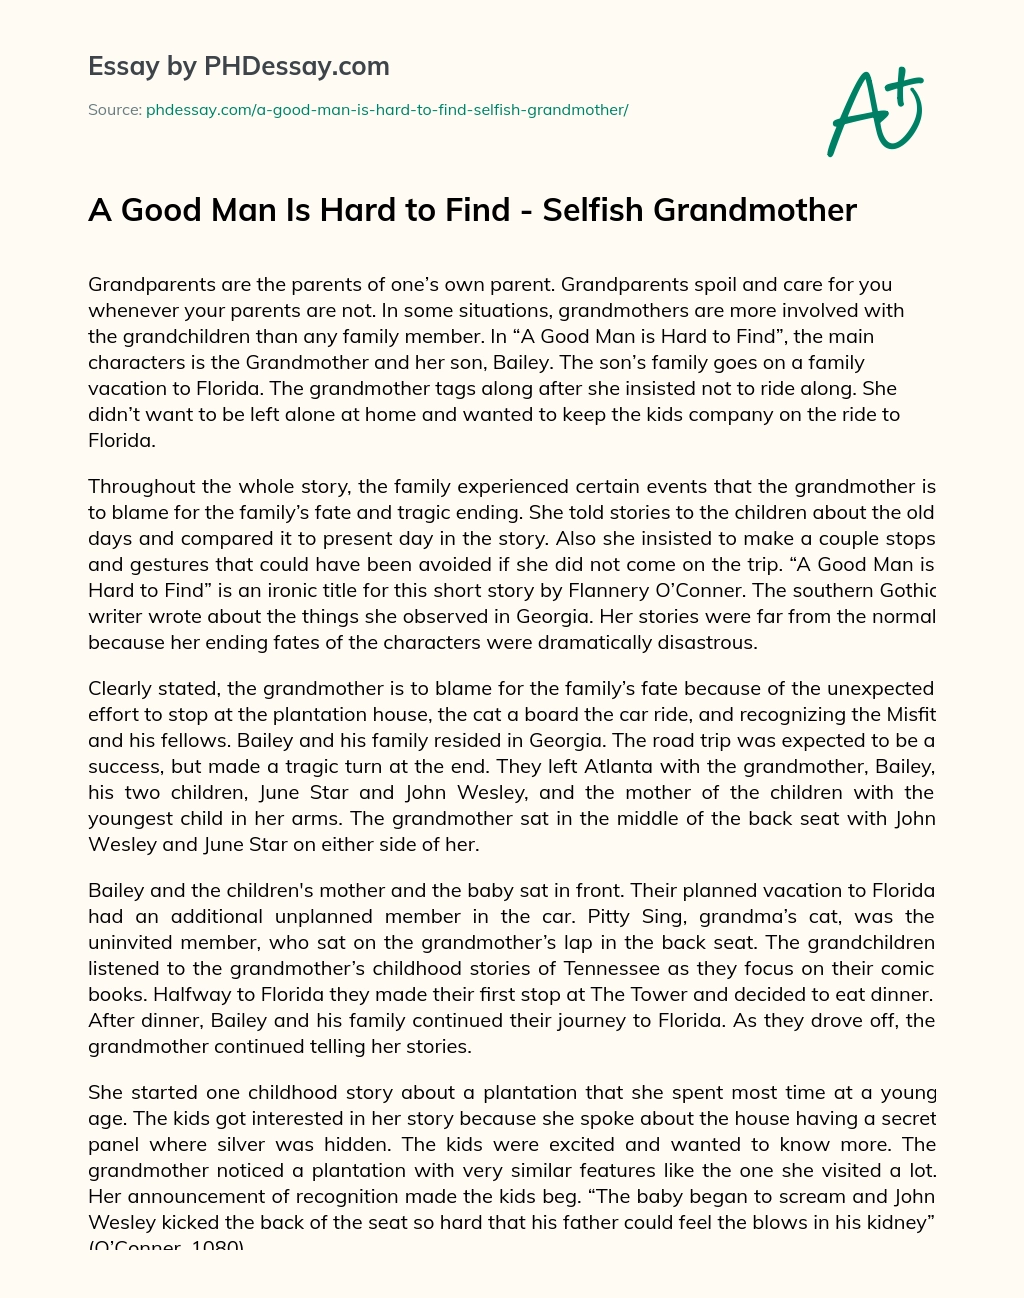 A Good Man Is Hard to Find – Selfish Grandmother essay